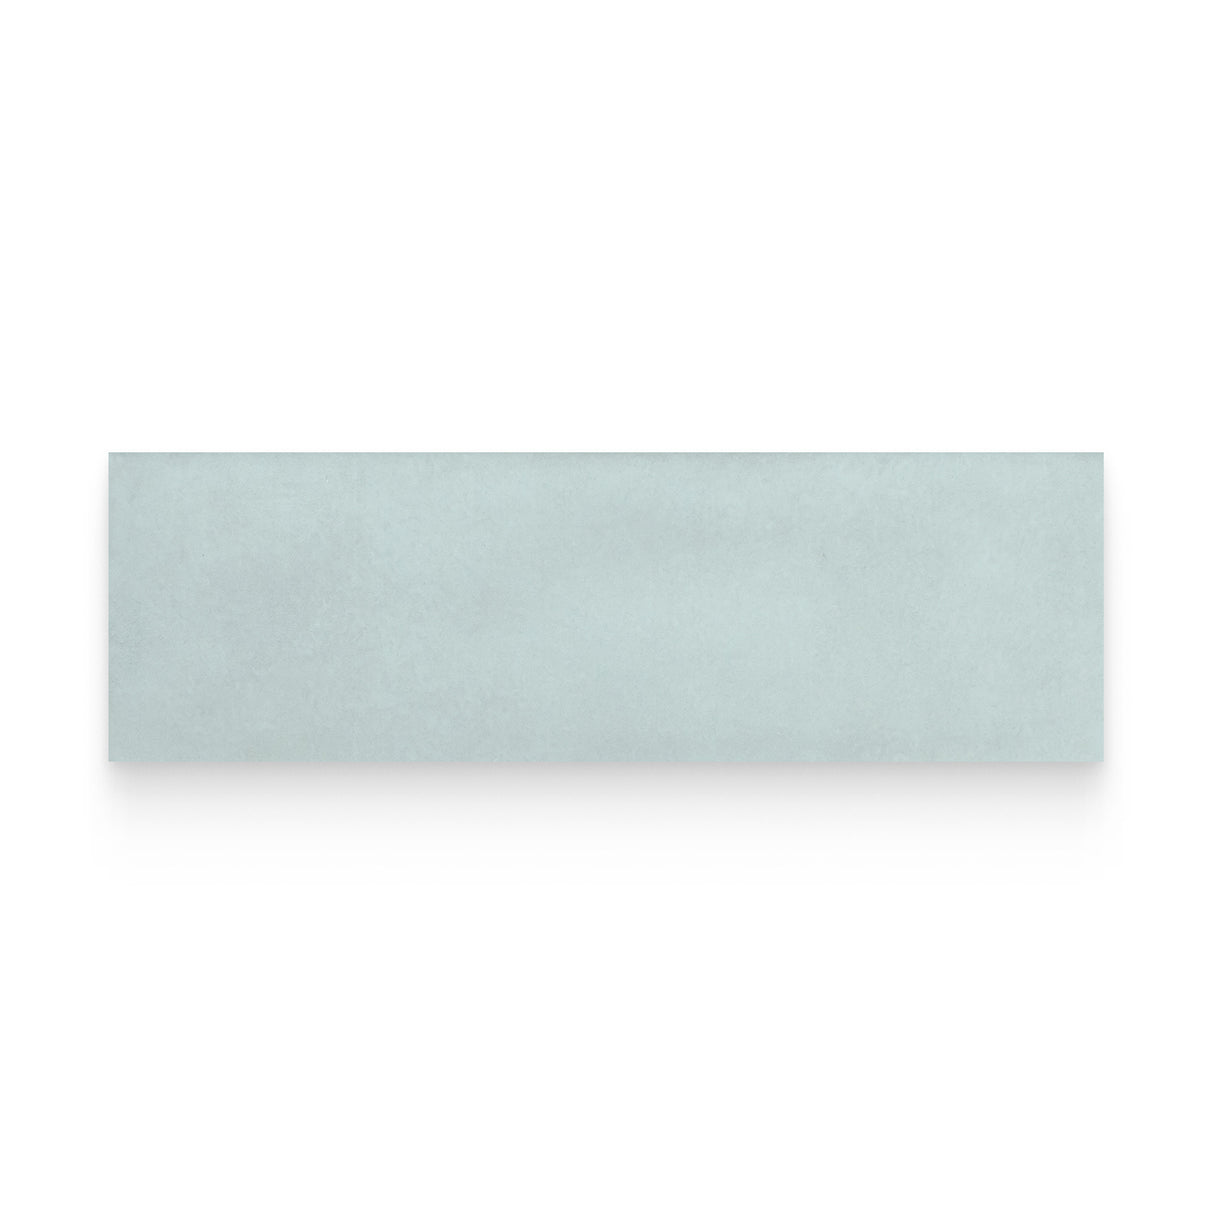 Country 2.5x8 Cloud Glossy Rectangle Tile